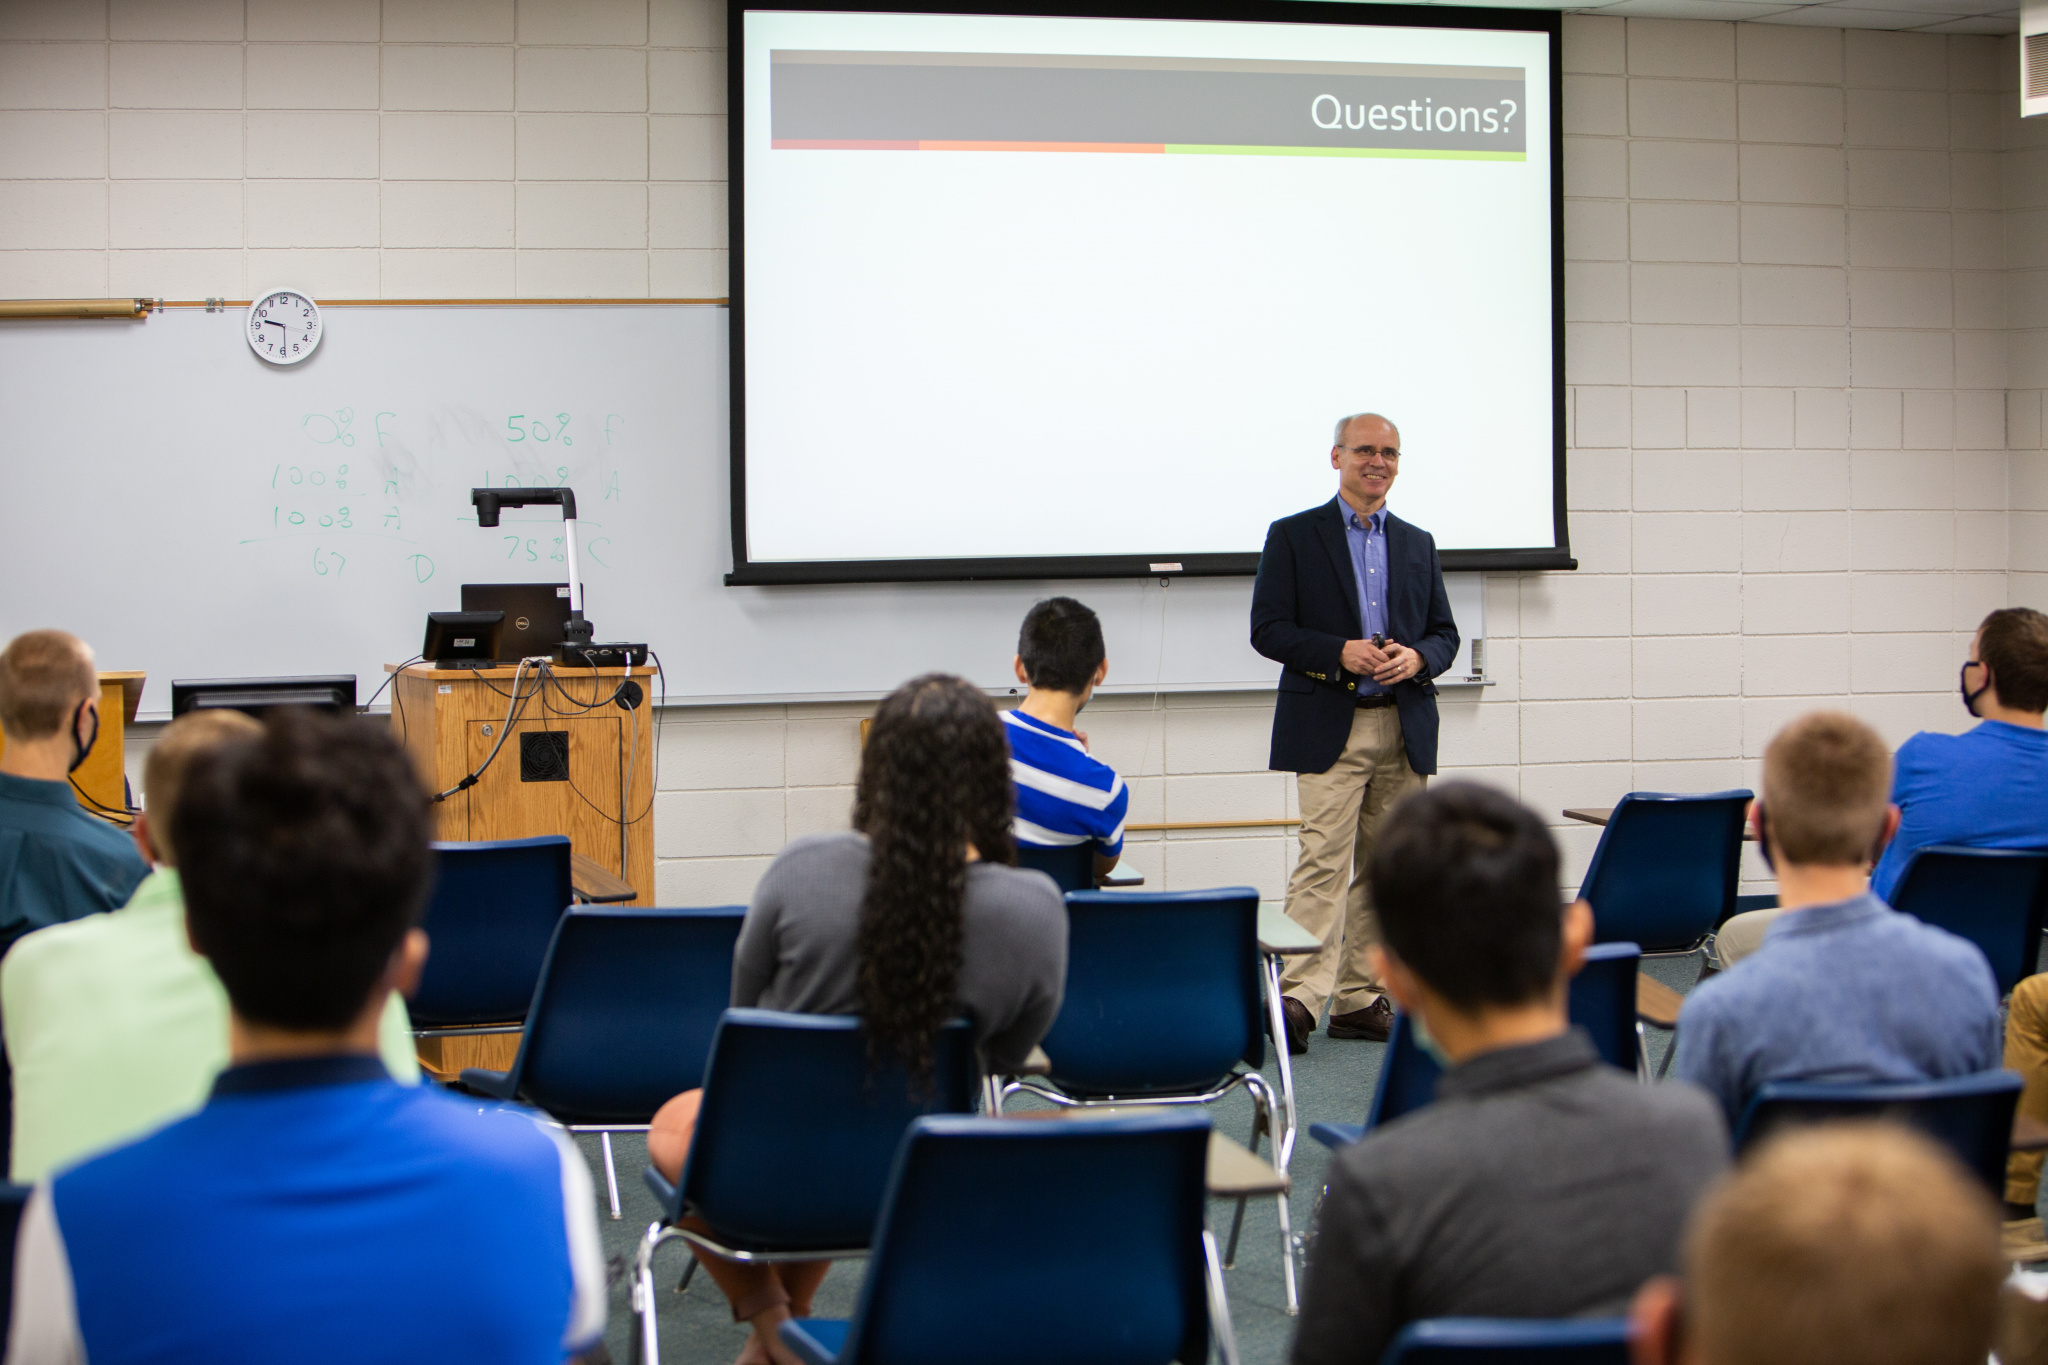 Dr. Bill Lovegrove introduces engineering students to the principles of engineering (Photo by David Ruiz)